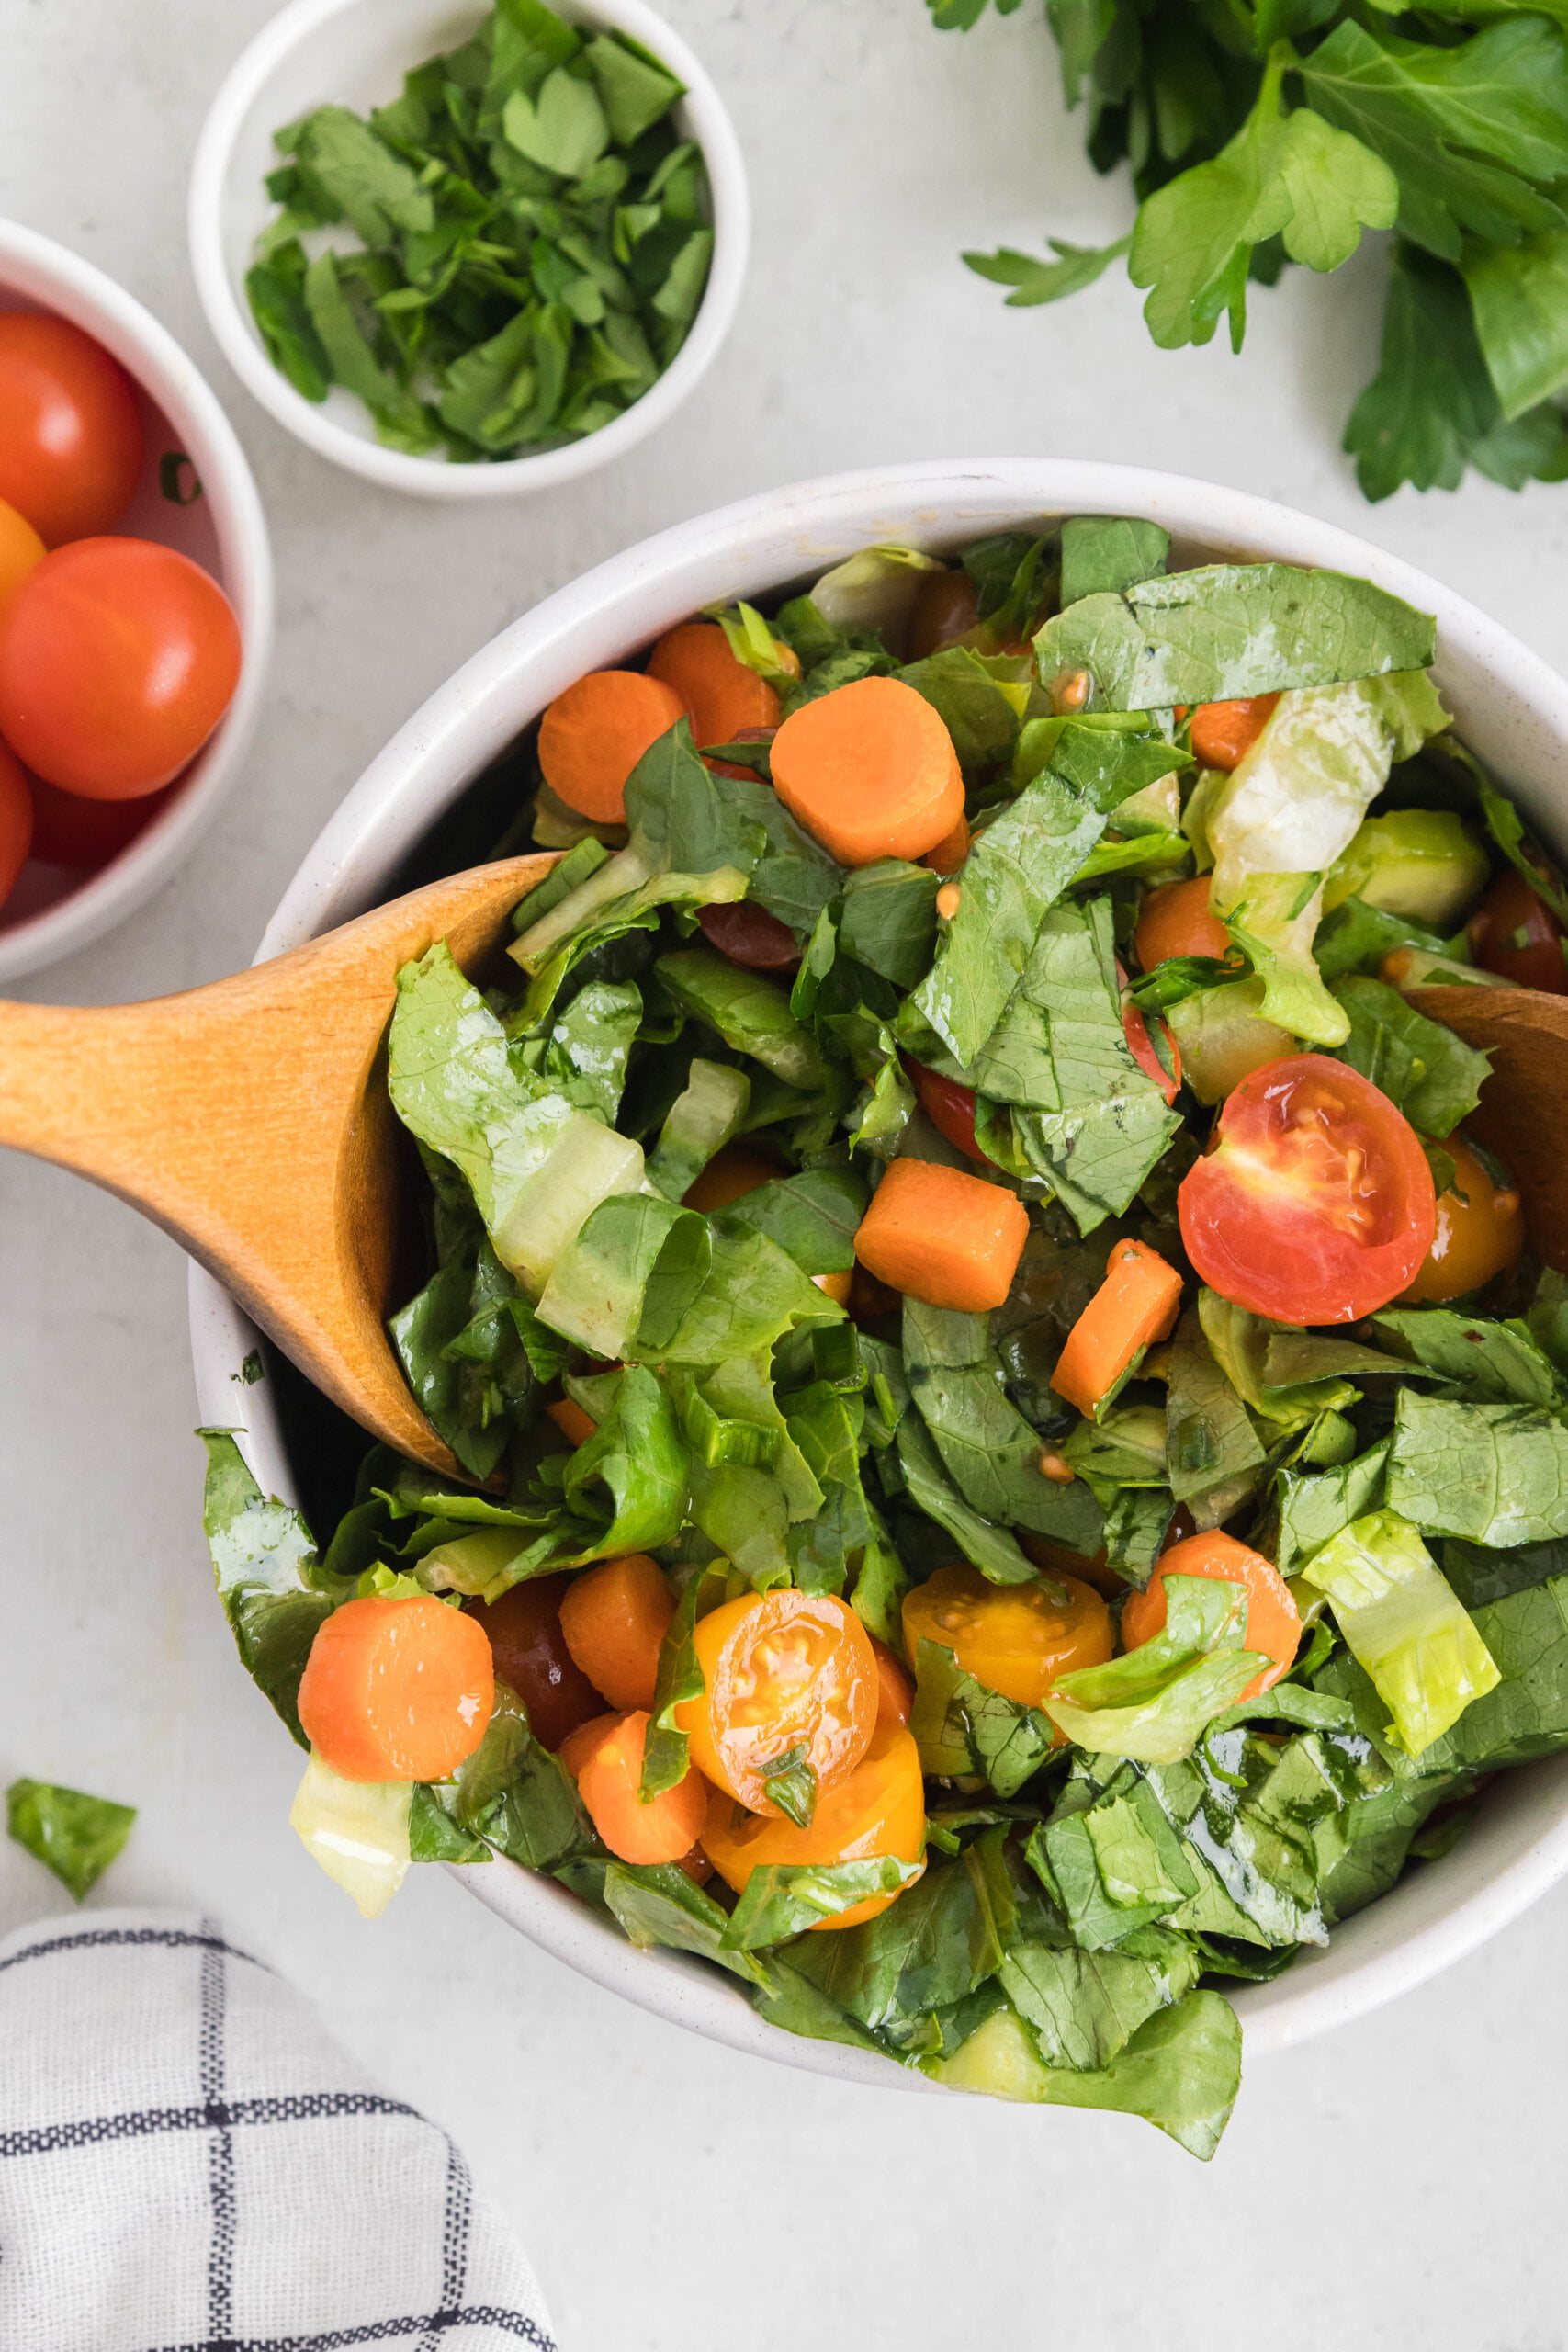 Garden Salad Recipe with Homemade Vinaigrette tossed in a large white bowl with a wood salad spoon